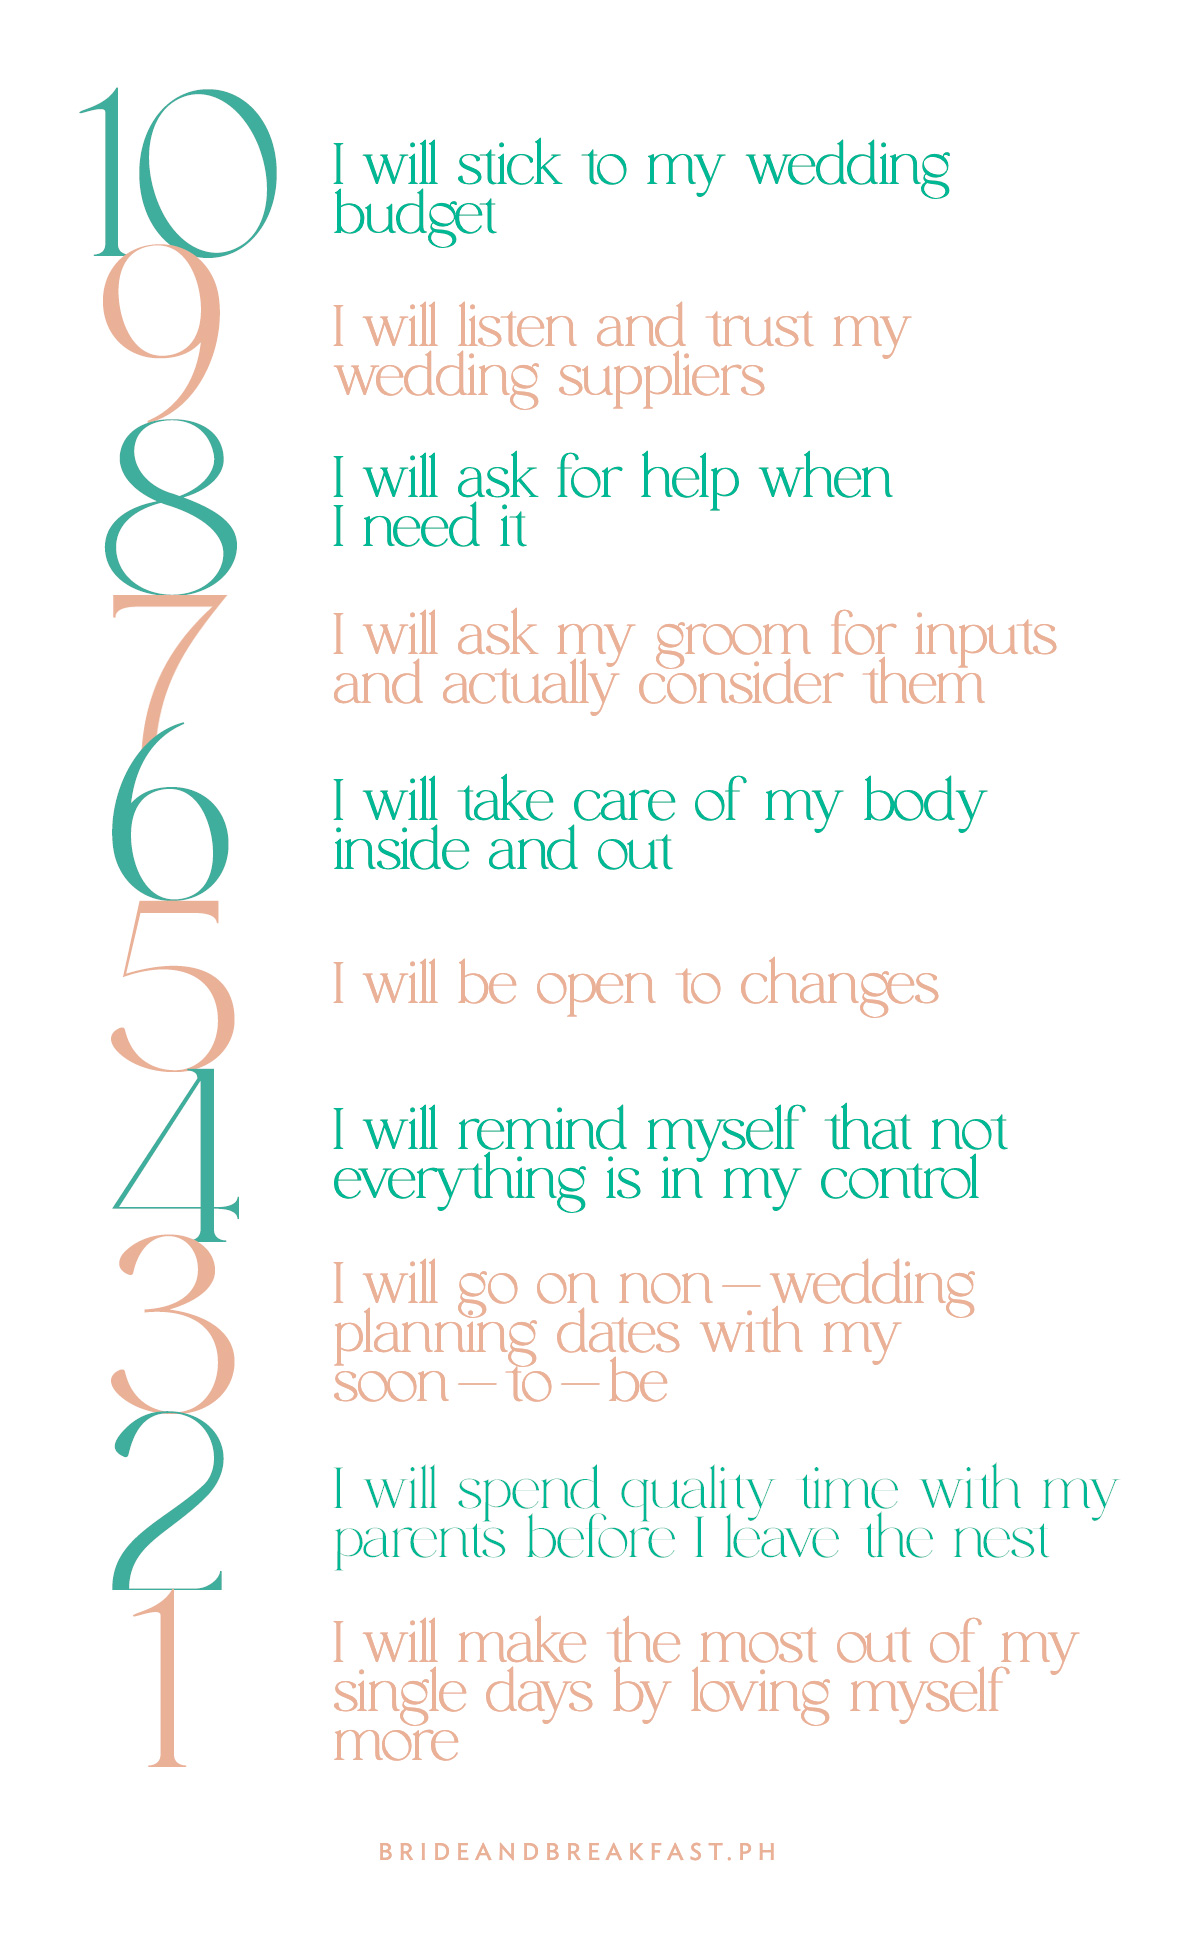 10 - I will stick to my wedding budget 9 - I will listen and trust my wedding suppliers 8- I will ask for help when I need it 7- I will ask my groom for inputs and actually consider them 6 - I will take care of my body inside and out 5 - I will be open to changes 4 - I will remind myself that not everything is in my control 3 - I will go on non-wedding planning dates with my soon-to-be 2 - I will spend quality time with my parents before I leave the nest 1 - I will make the most out of my single days by loving myself more